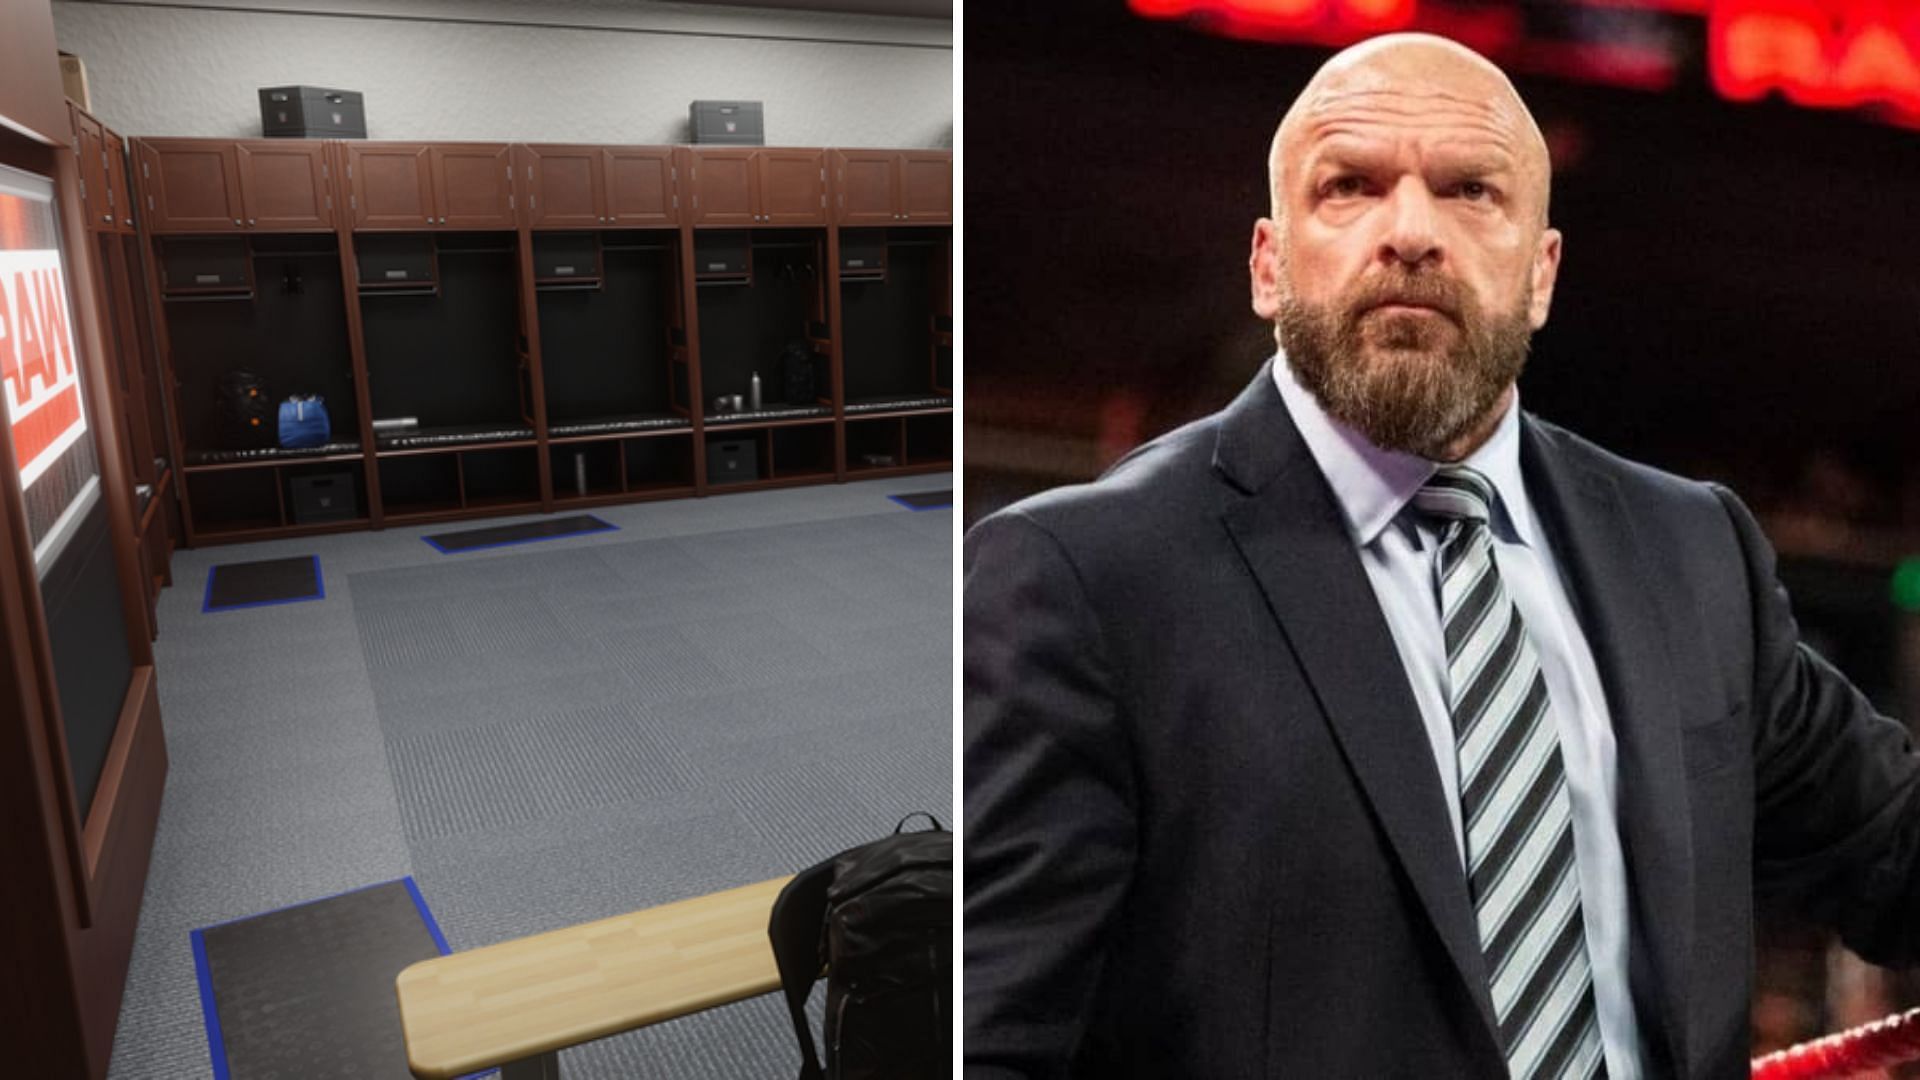 Triple H is in charge of creative after Vince McMahon retired.